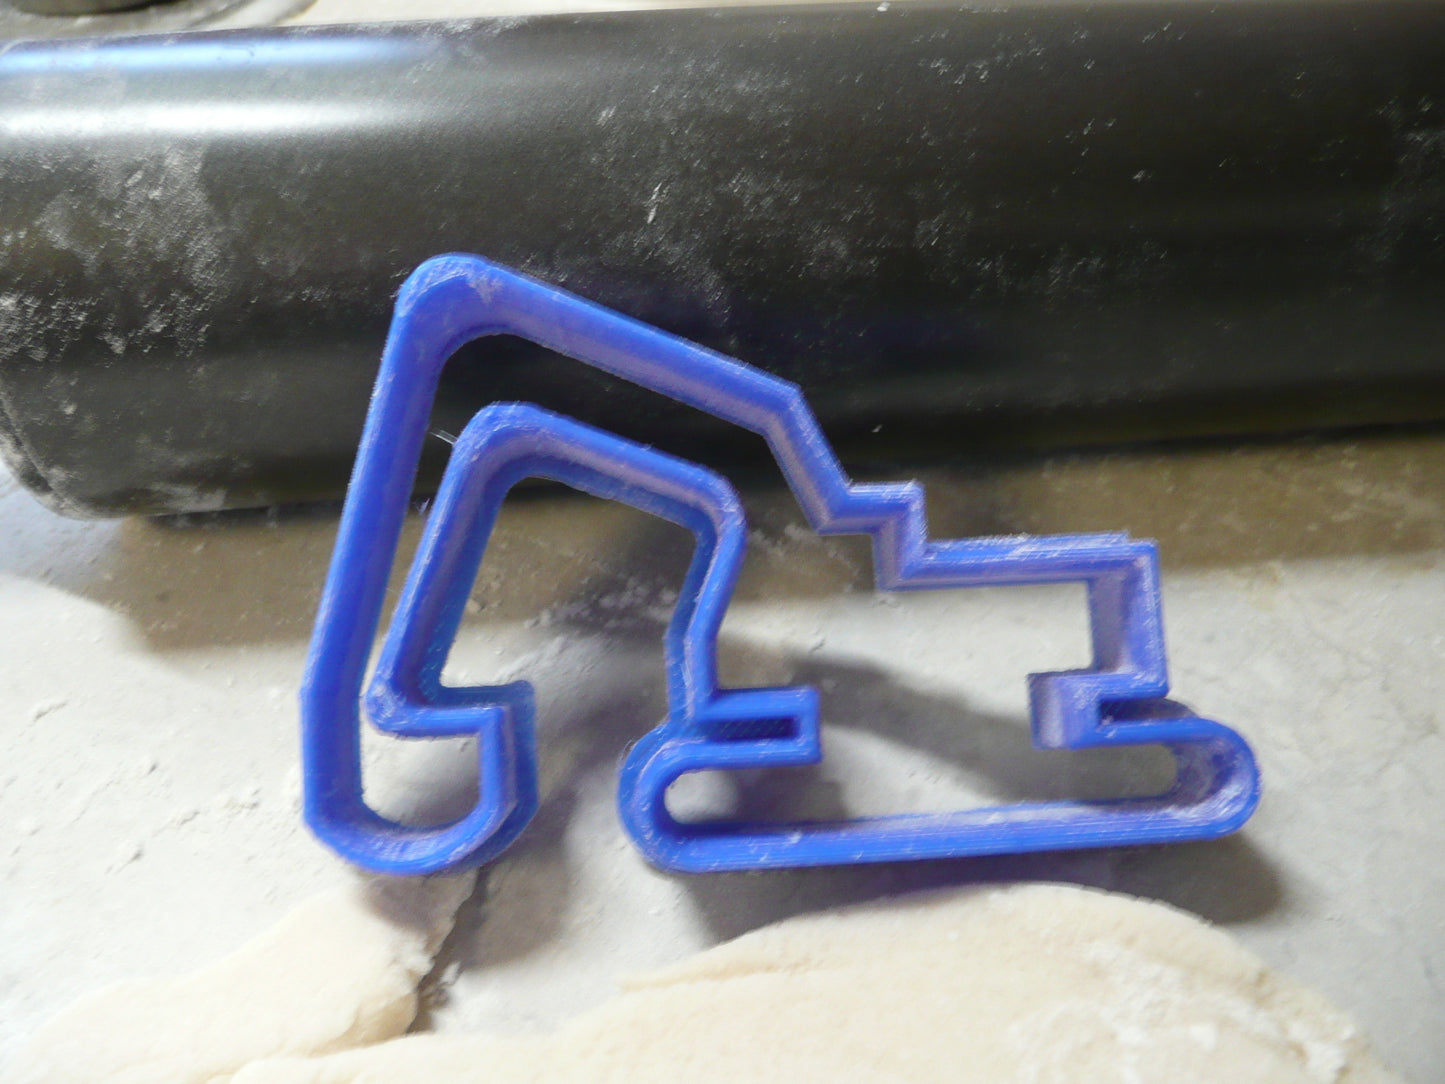 Excavator Digger Equipment Cookie Cutter Baking Tool Made In USA PR501